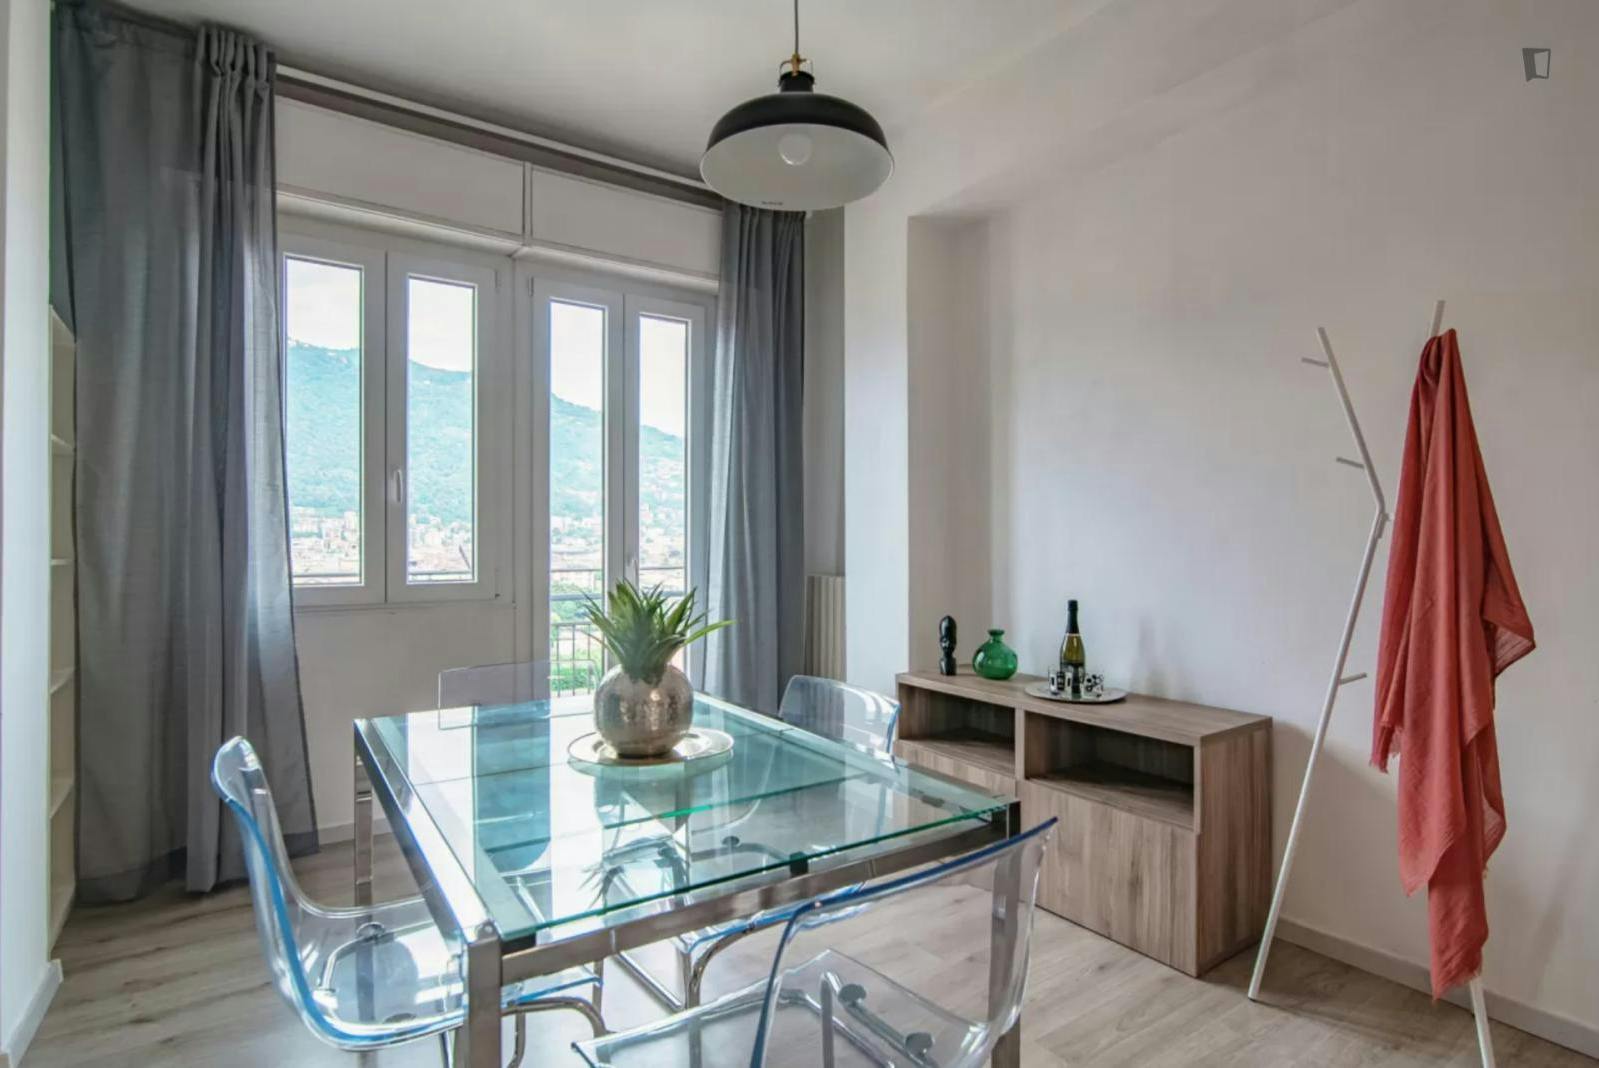 Neat 2-bedroom flat close to S. Giovanni train station